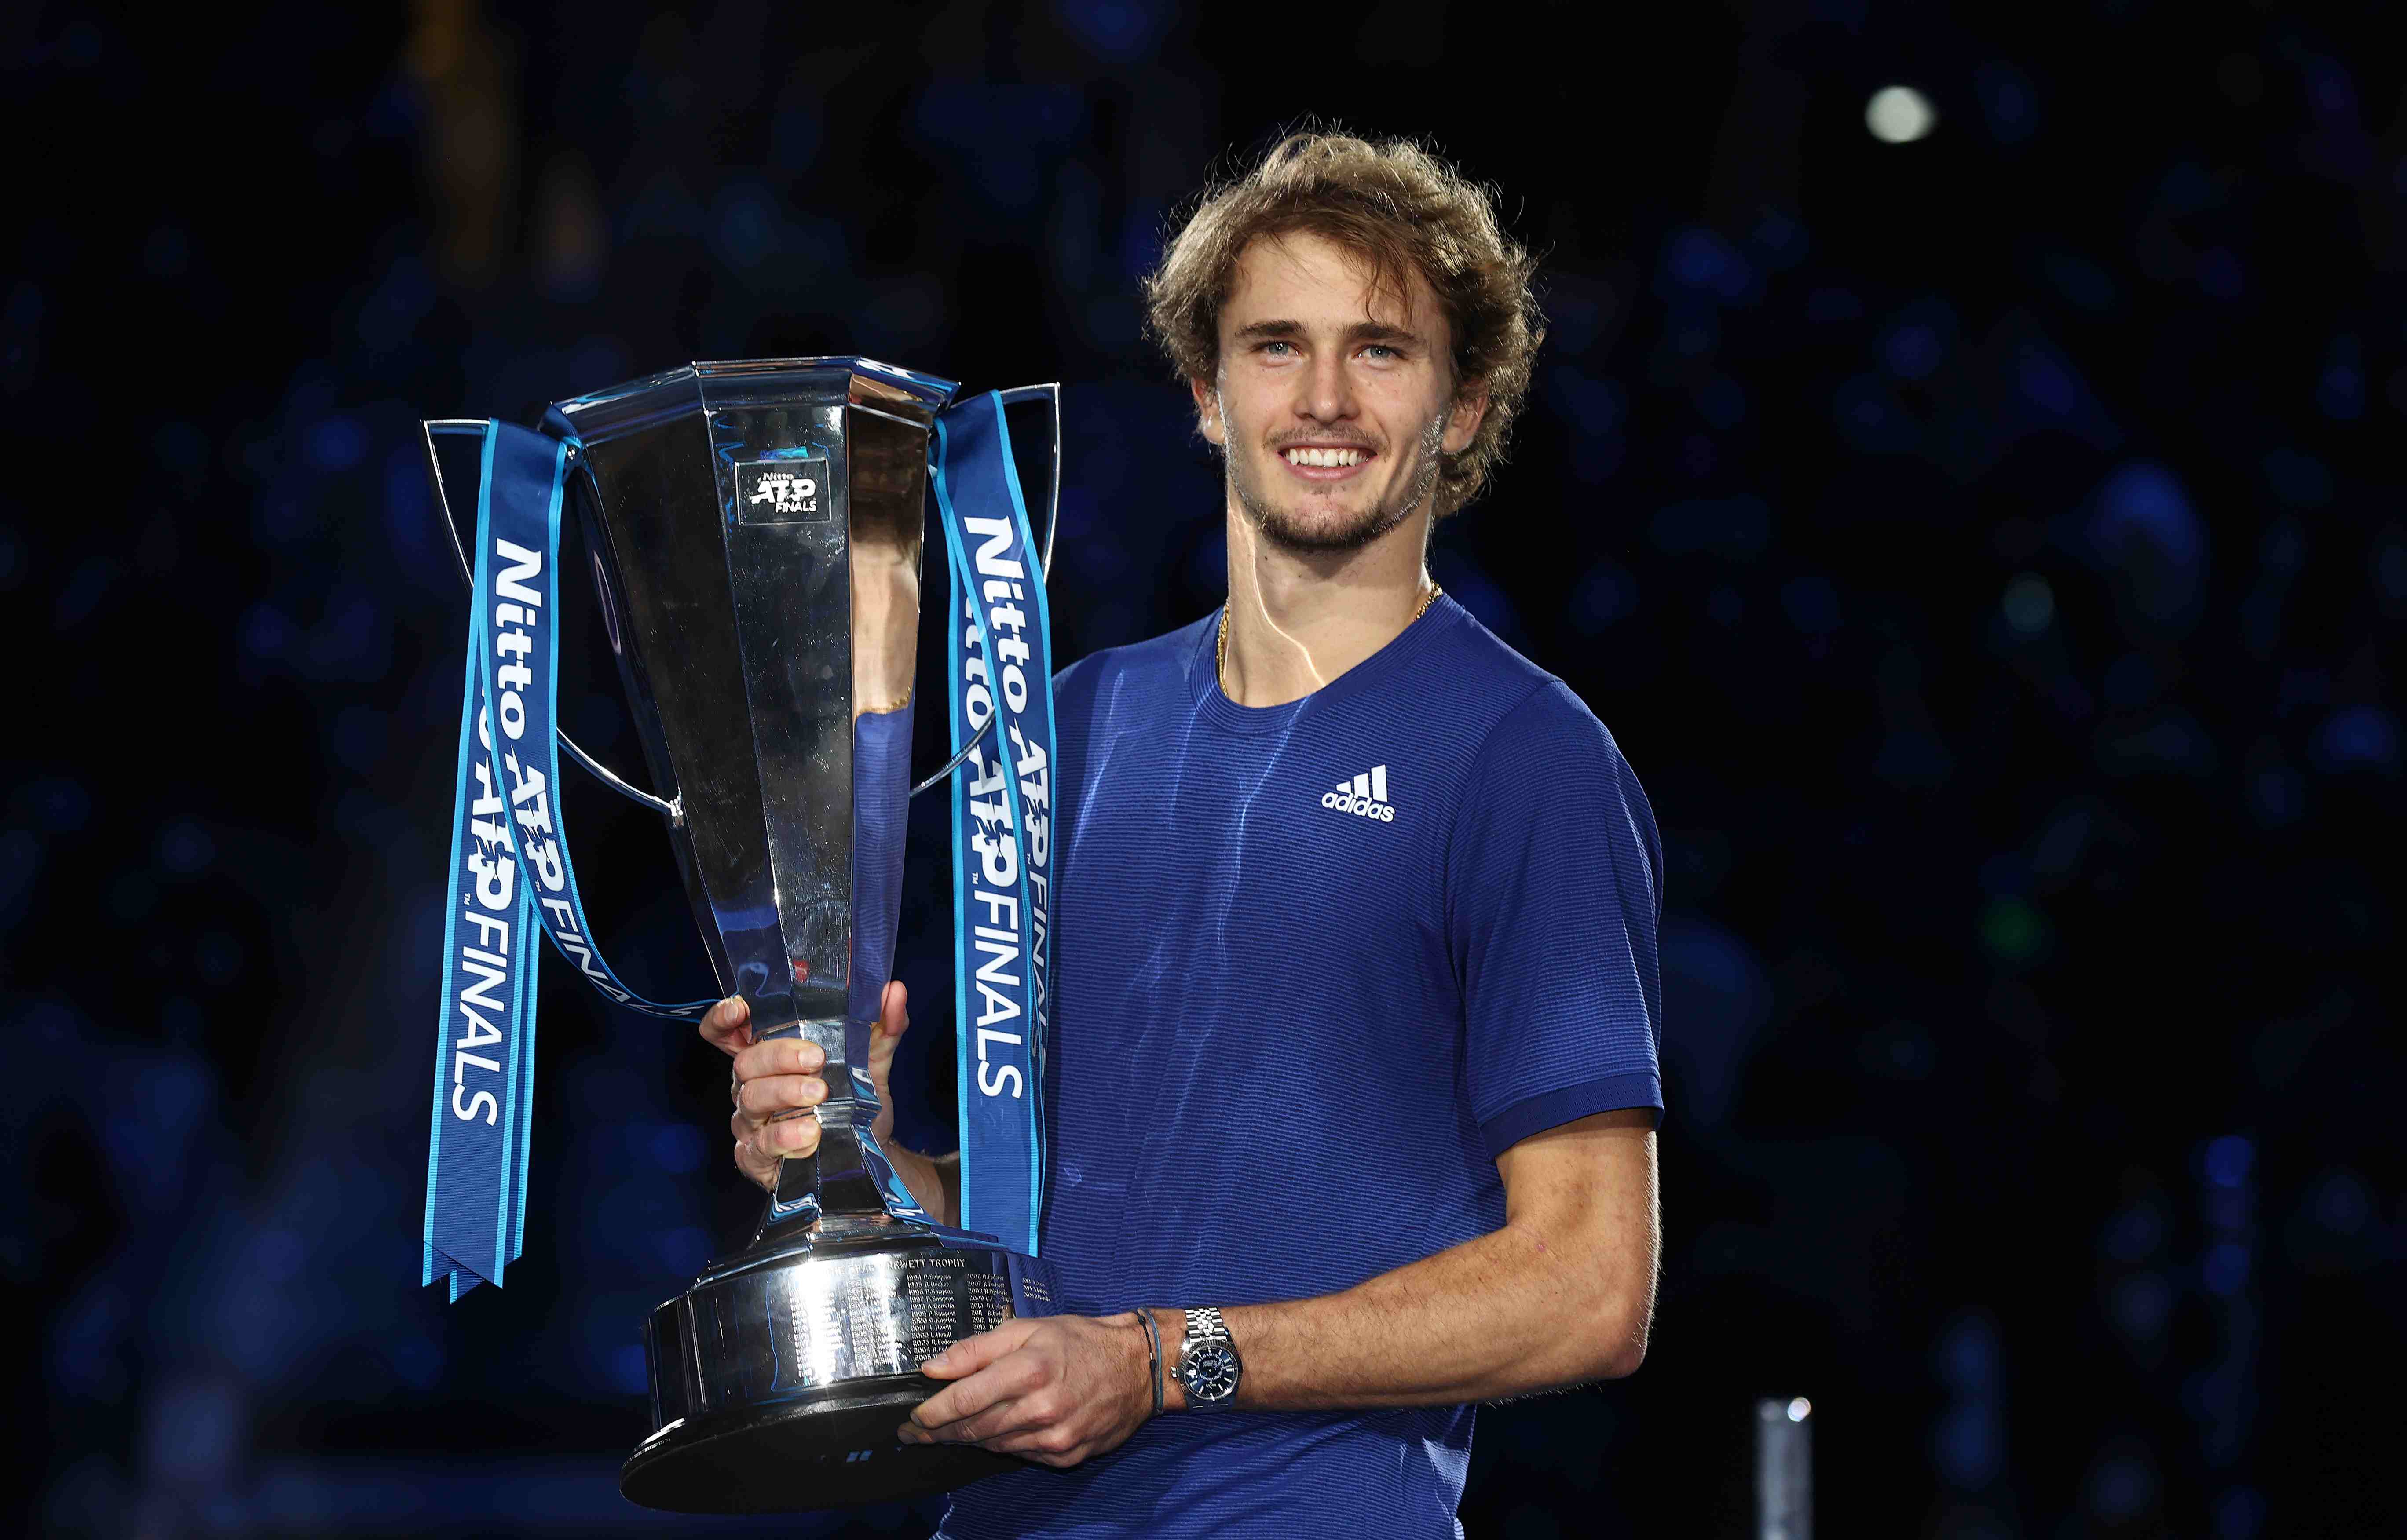 Nitto ATP Finals 2022 Preview, draw, schedule and how to watch